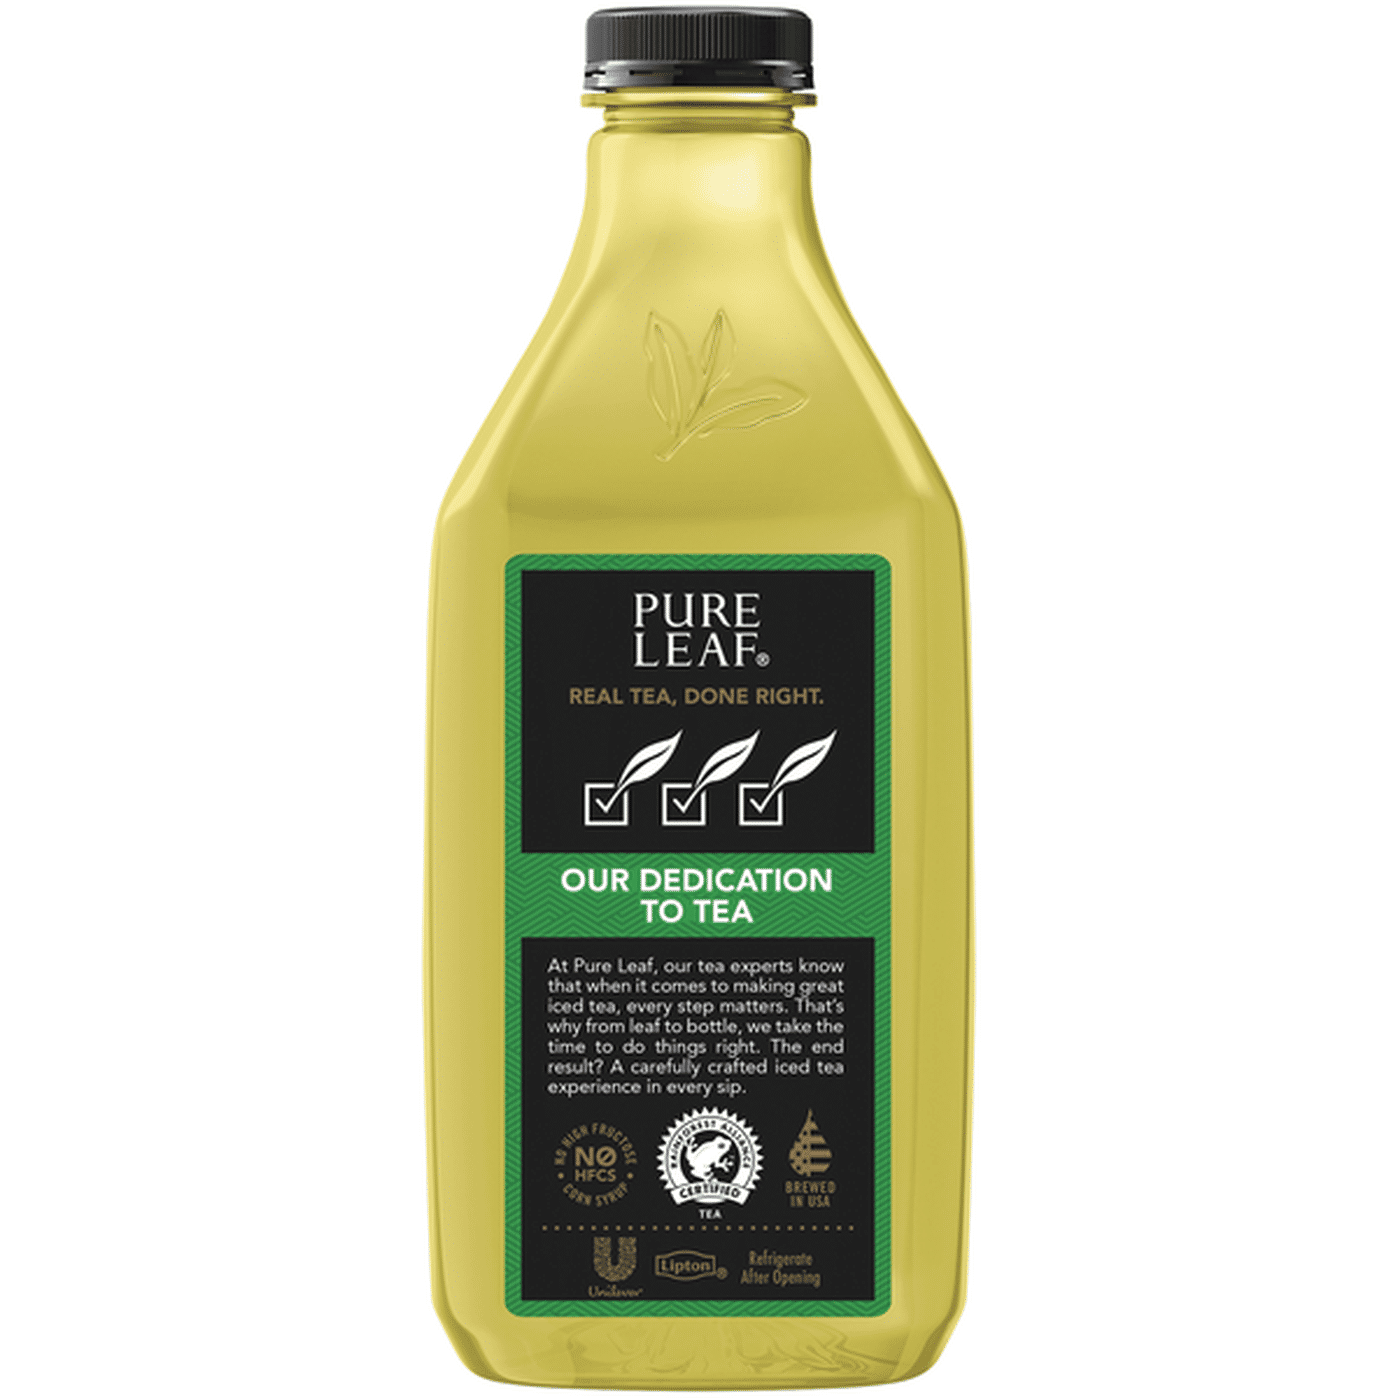 Pure Leaf Unsweetened Green Tea (64 fl oz) Delivery or Pickup Near Me